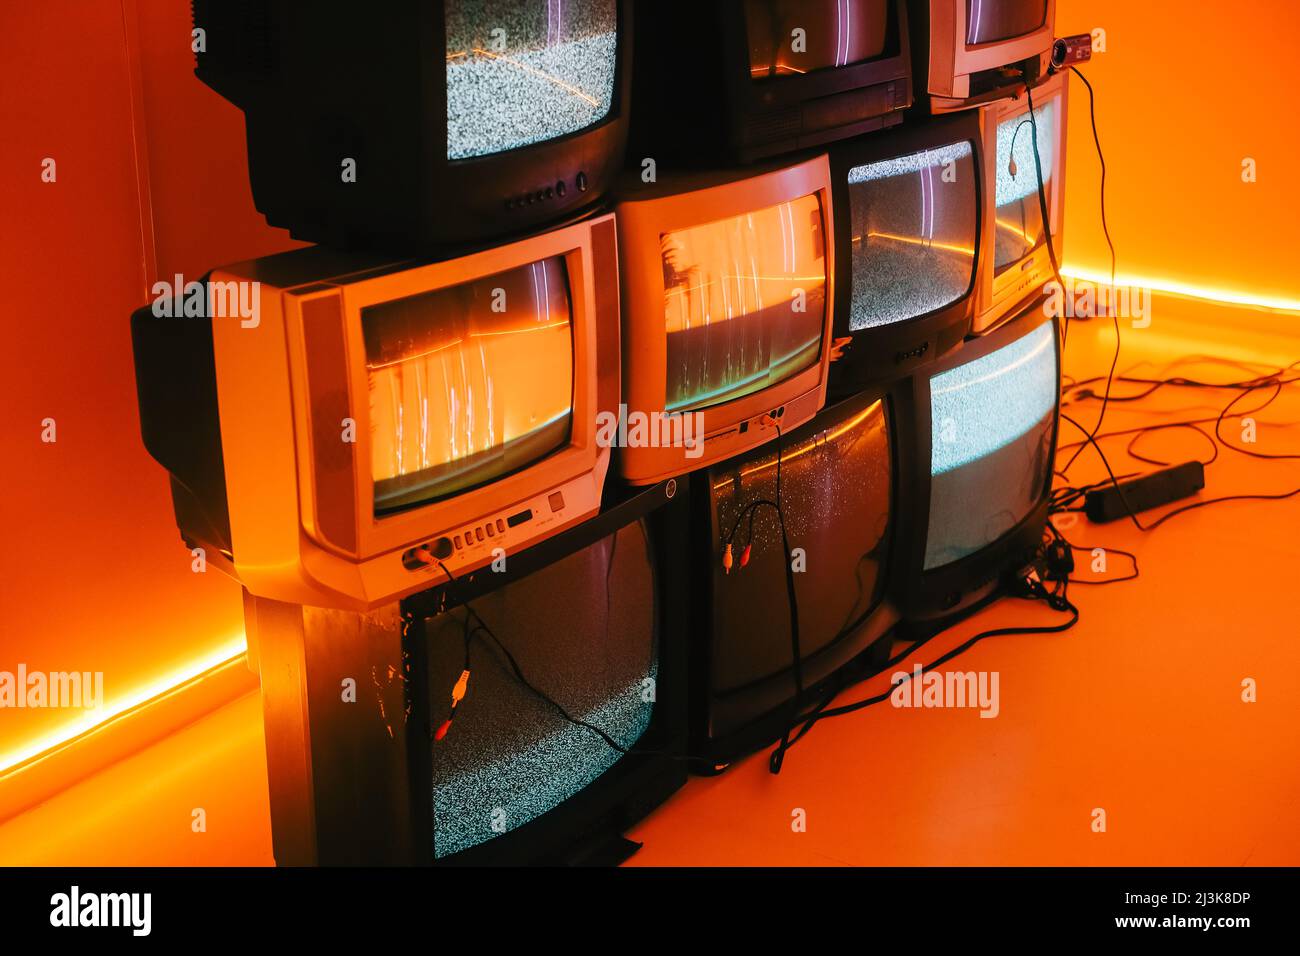 Old vintage tvs on a floor in a room with colored neon light. Stock Photo